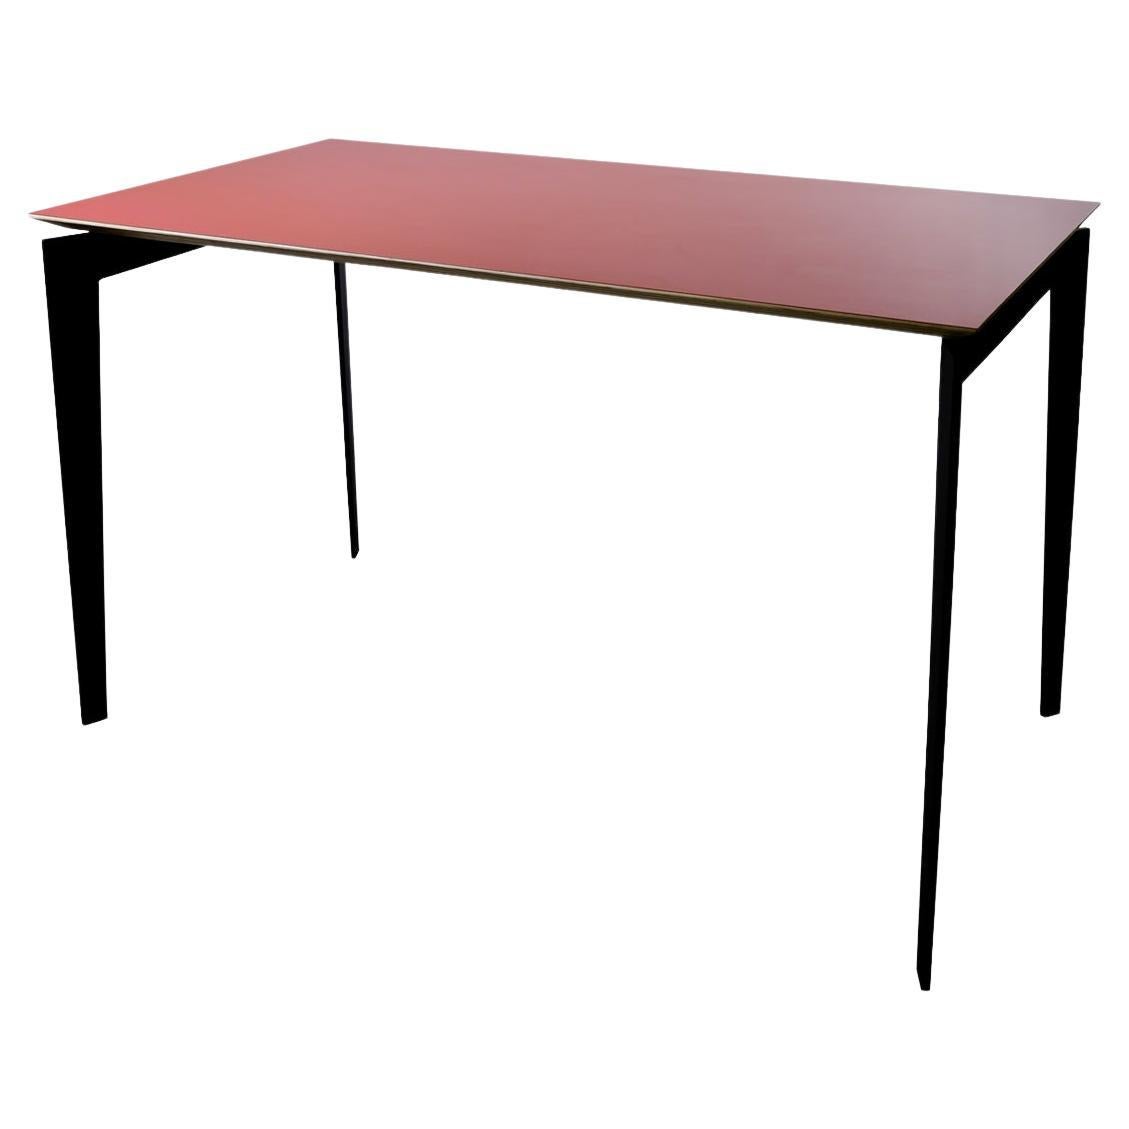 Italian Contemporary Steel and Plywood Table, "Armabianca 01" by Errante